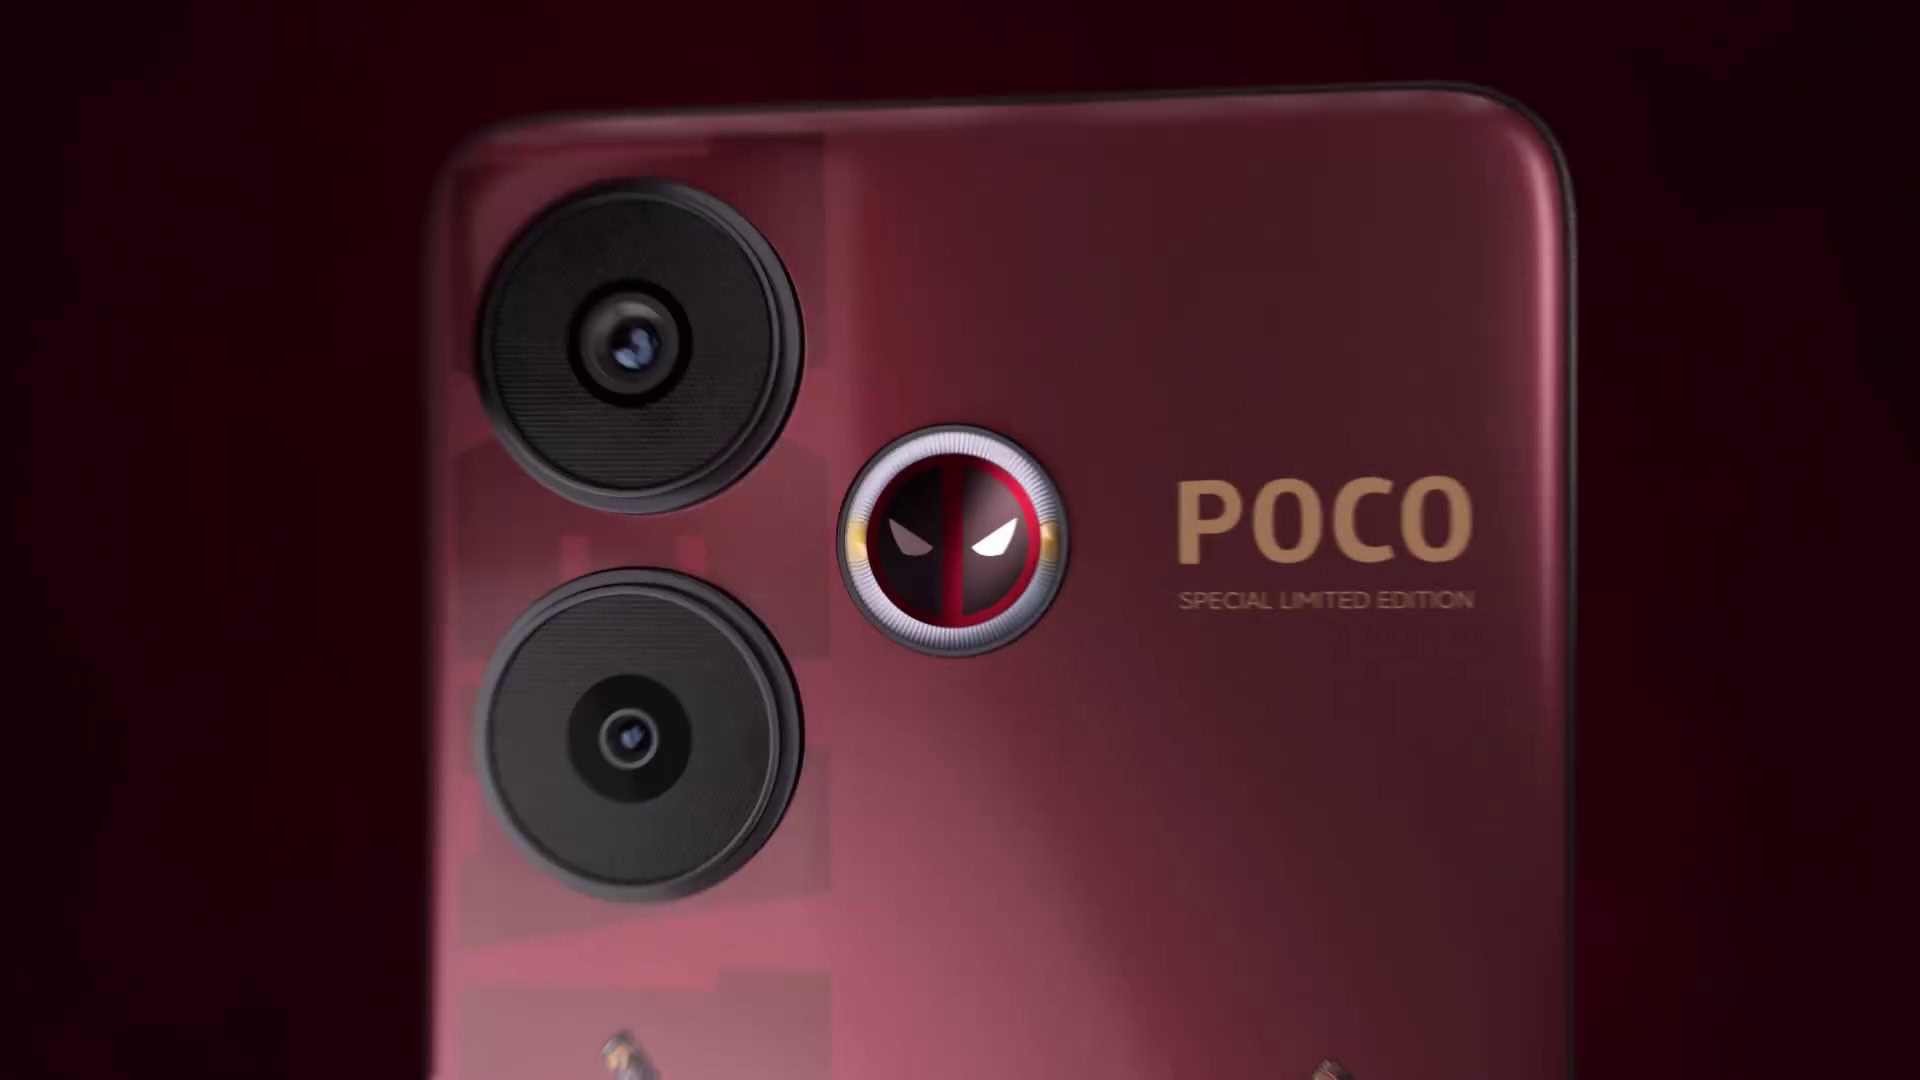 Deadpool’s Official Smartphone Is Here, And It’s Very Red